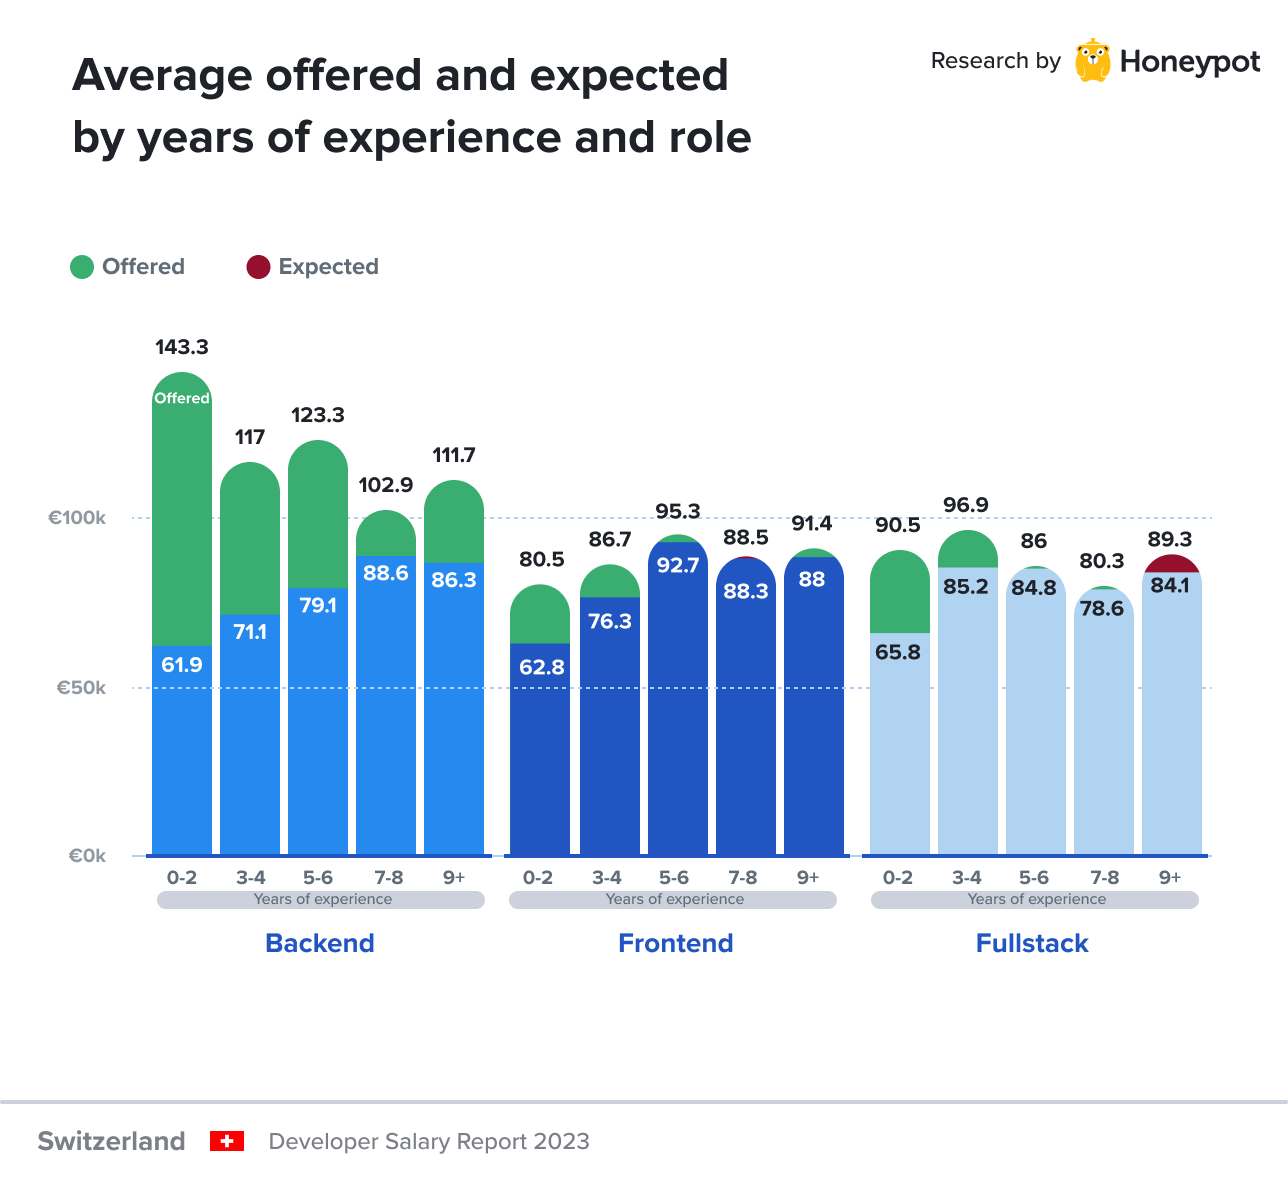 Switzerland – Average offered and expected by role and years of experience in Switzerland